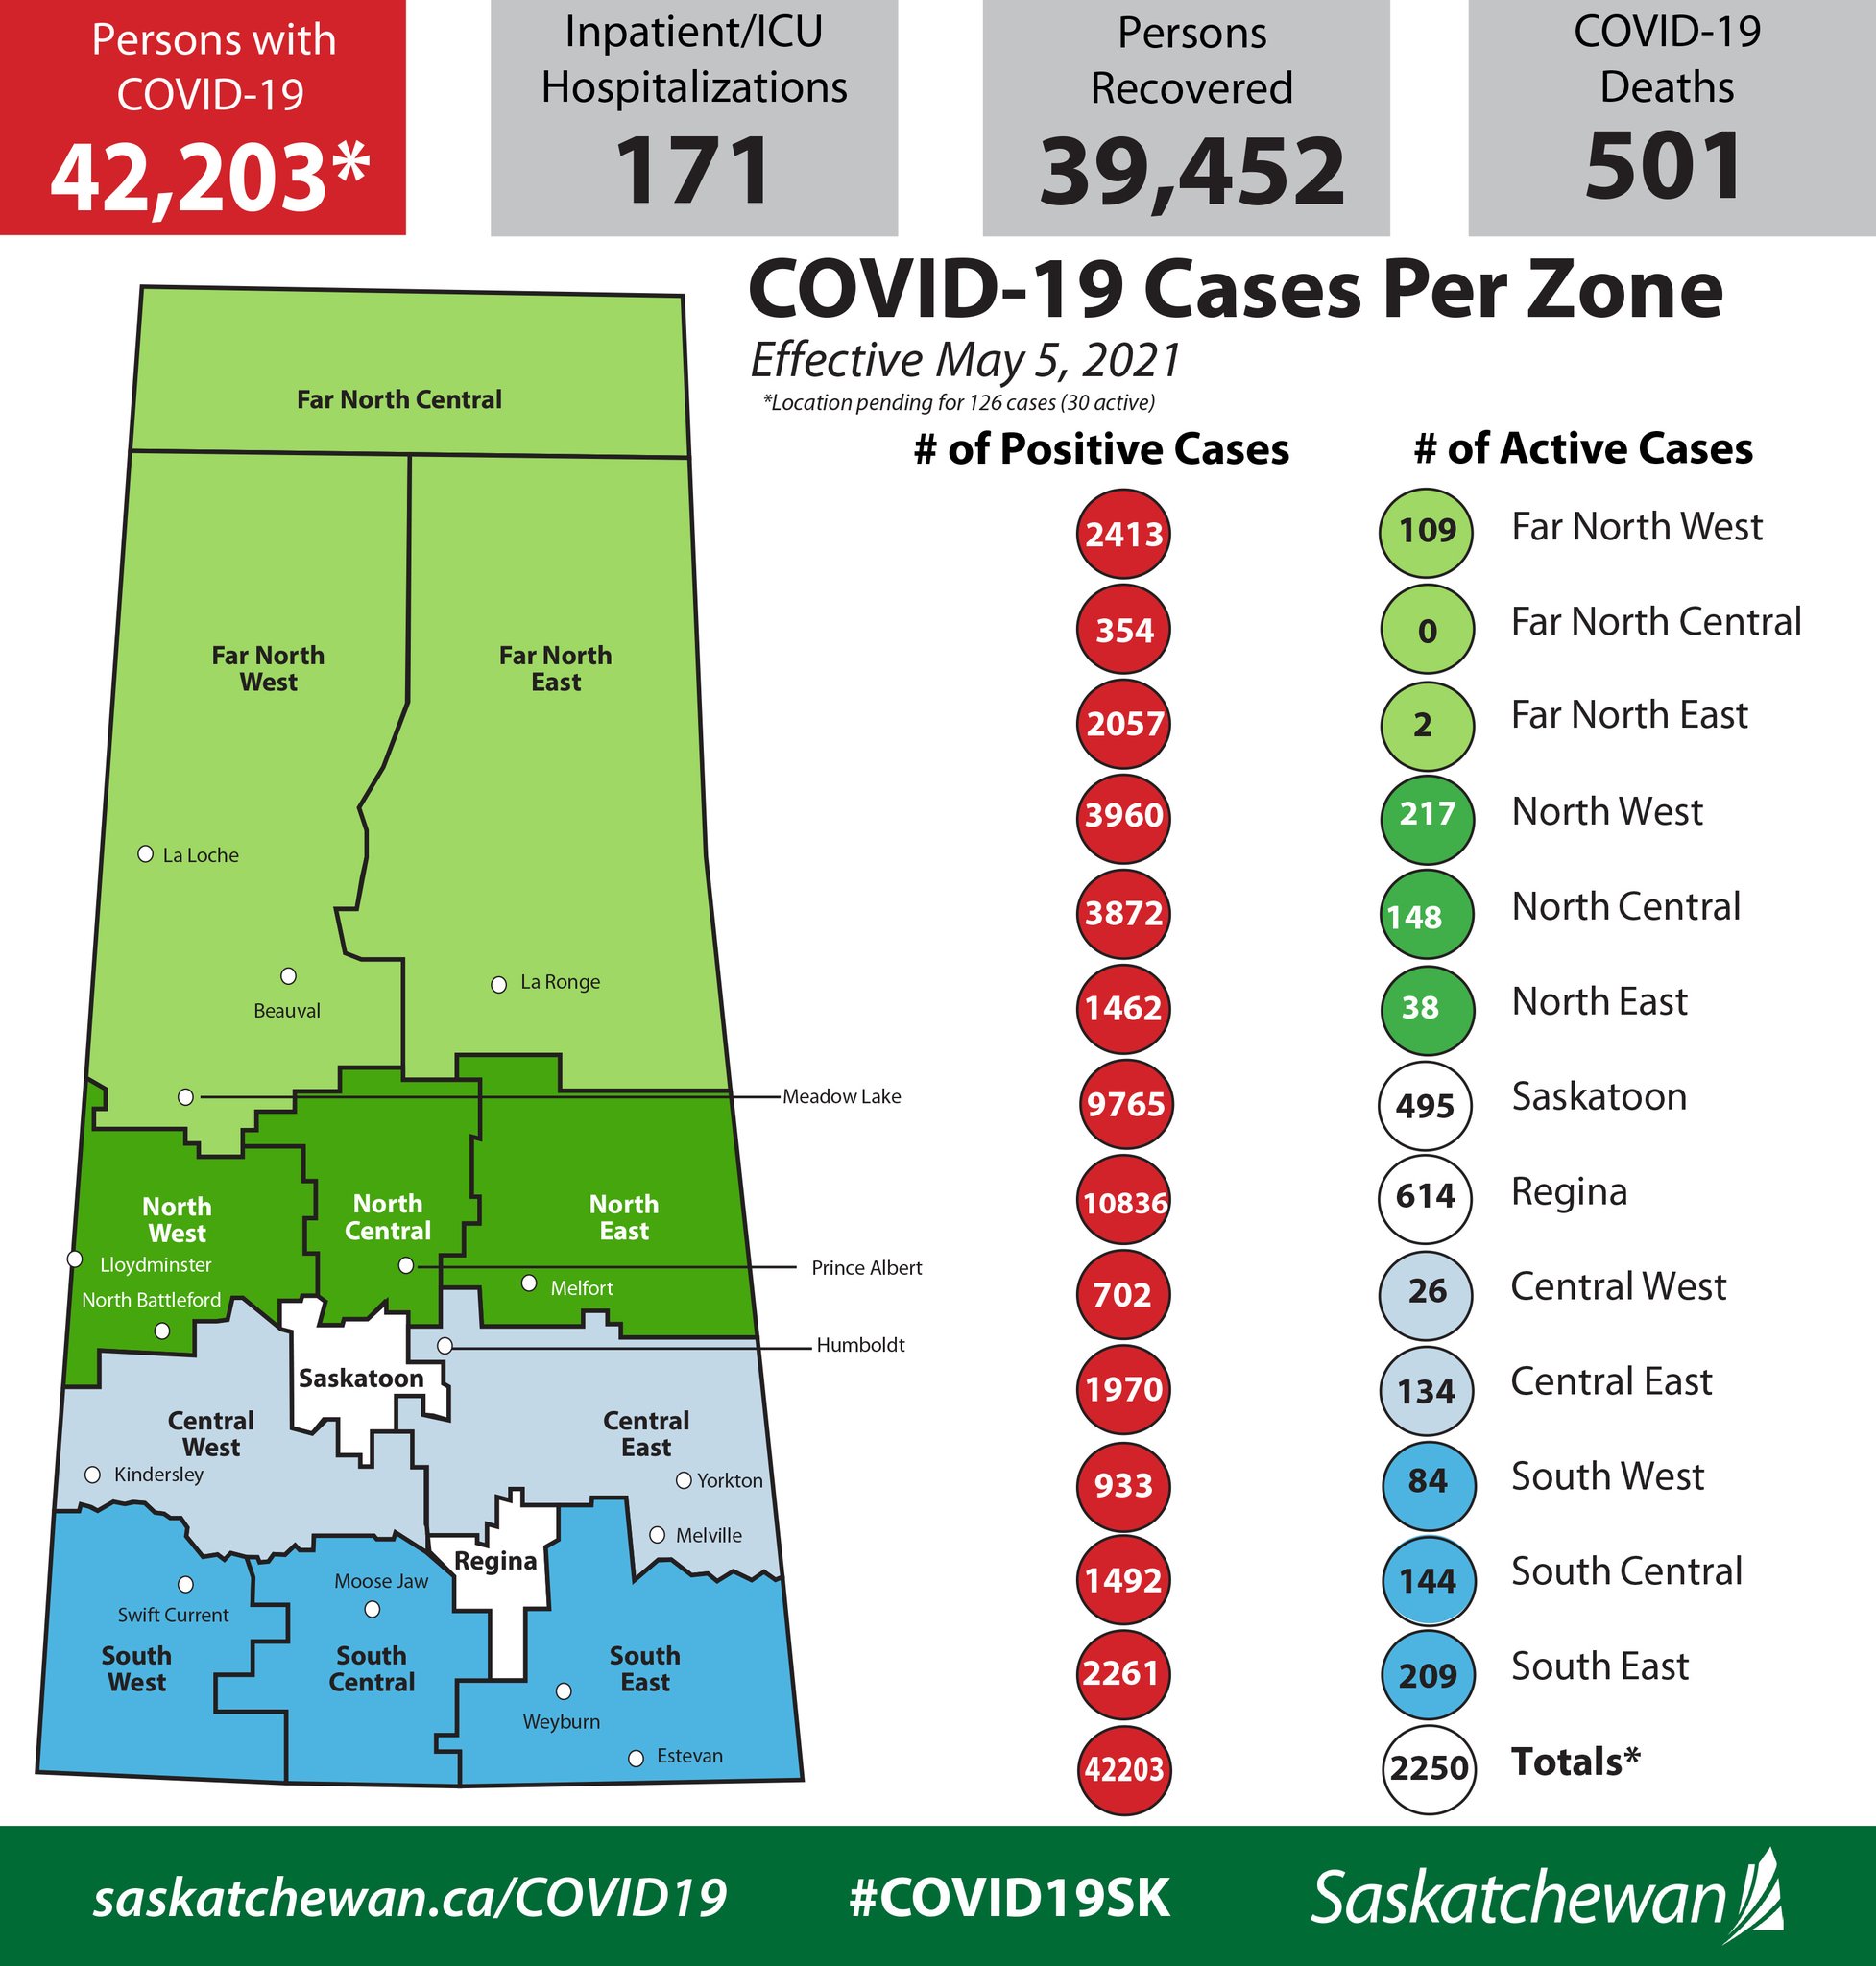 COVID-19 Update for May 5: 470,715 Vaccines Administered, 196 New Cases, 250 Recoveries, 171 in Hospital, Two New Deaths Current 7-Day Average: 224 (18.2 per 100,000). Full details: https://www.saskatchewan.ca/government/news-and-media/2021/may/05/covid19-update-for-may-5-470715-vaccines-administered-196-new-cases-250-recoveries-two-new-deaths COVID-19 Dashboard: https://dashboard.saskatchewan.ca/health-wellness